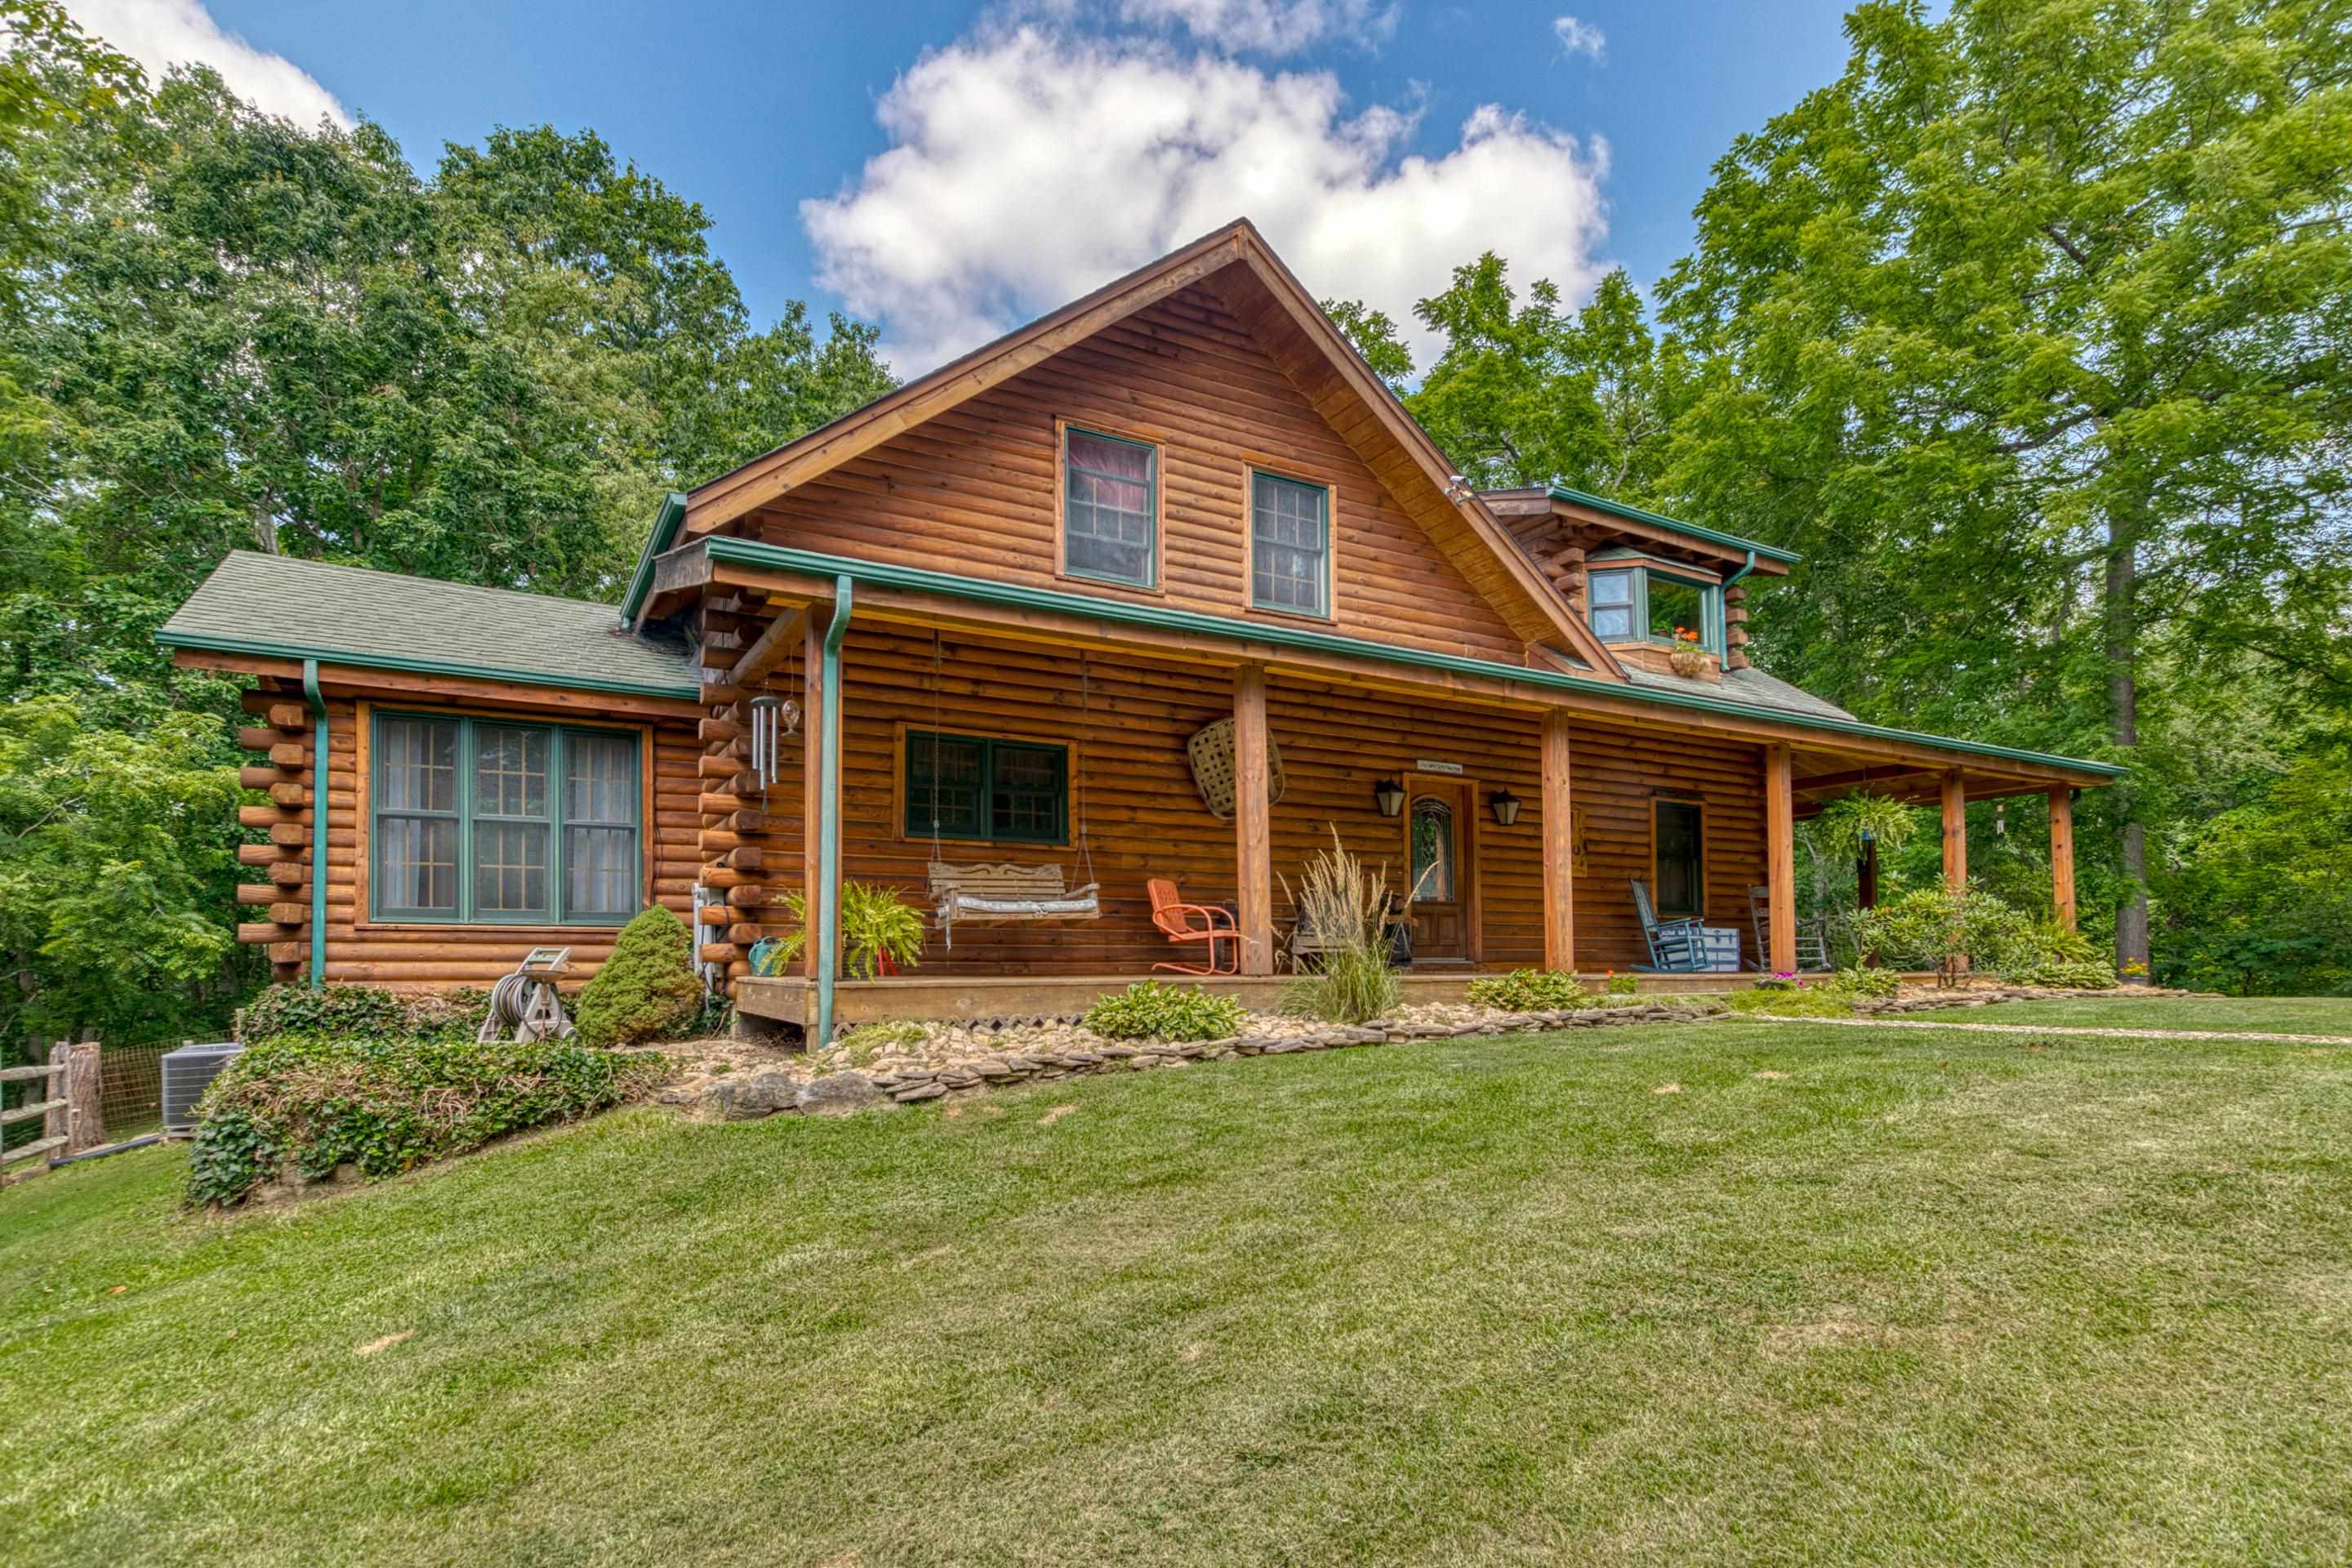 Nestled on 14.5  acres this cozy log home offers seclusion and convenience. Only 6 mins to downtown Christiansburg and Interstate I-81.  When you walk in the front door you will immediately have the sense of warm and cozy. The high vaulted ceiling in the great room is accented beautifully with exposed wood beams, 6 large gable end windows, and stone gas fireplace.  3 bedroom , 2 bath , sunroom, laundry/mudroom w/ utility sink, Kitchen offers an eat in bar, granite counters, stainless appliances. Primary bedroom offers a walk in closet, and bay windows. Beautiful hardwood floors throughout the home. Enjoy relaxing on the large wrap around deck and take in the the evening sunsets and wildlife. Double detached garage for  and plenty of parking space.